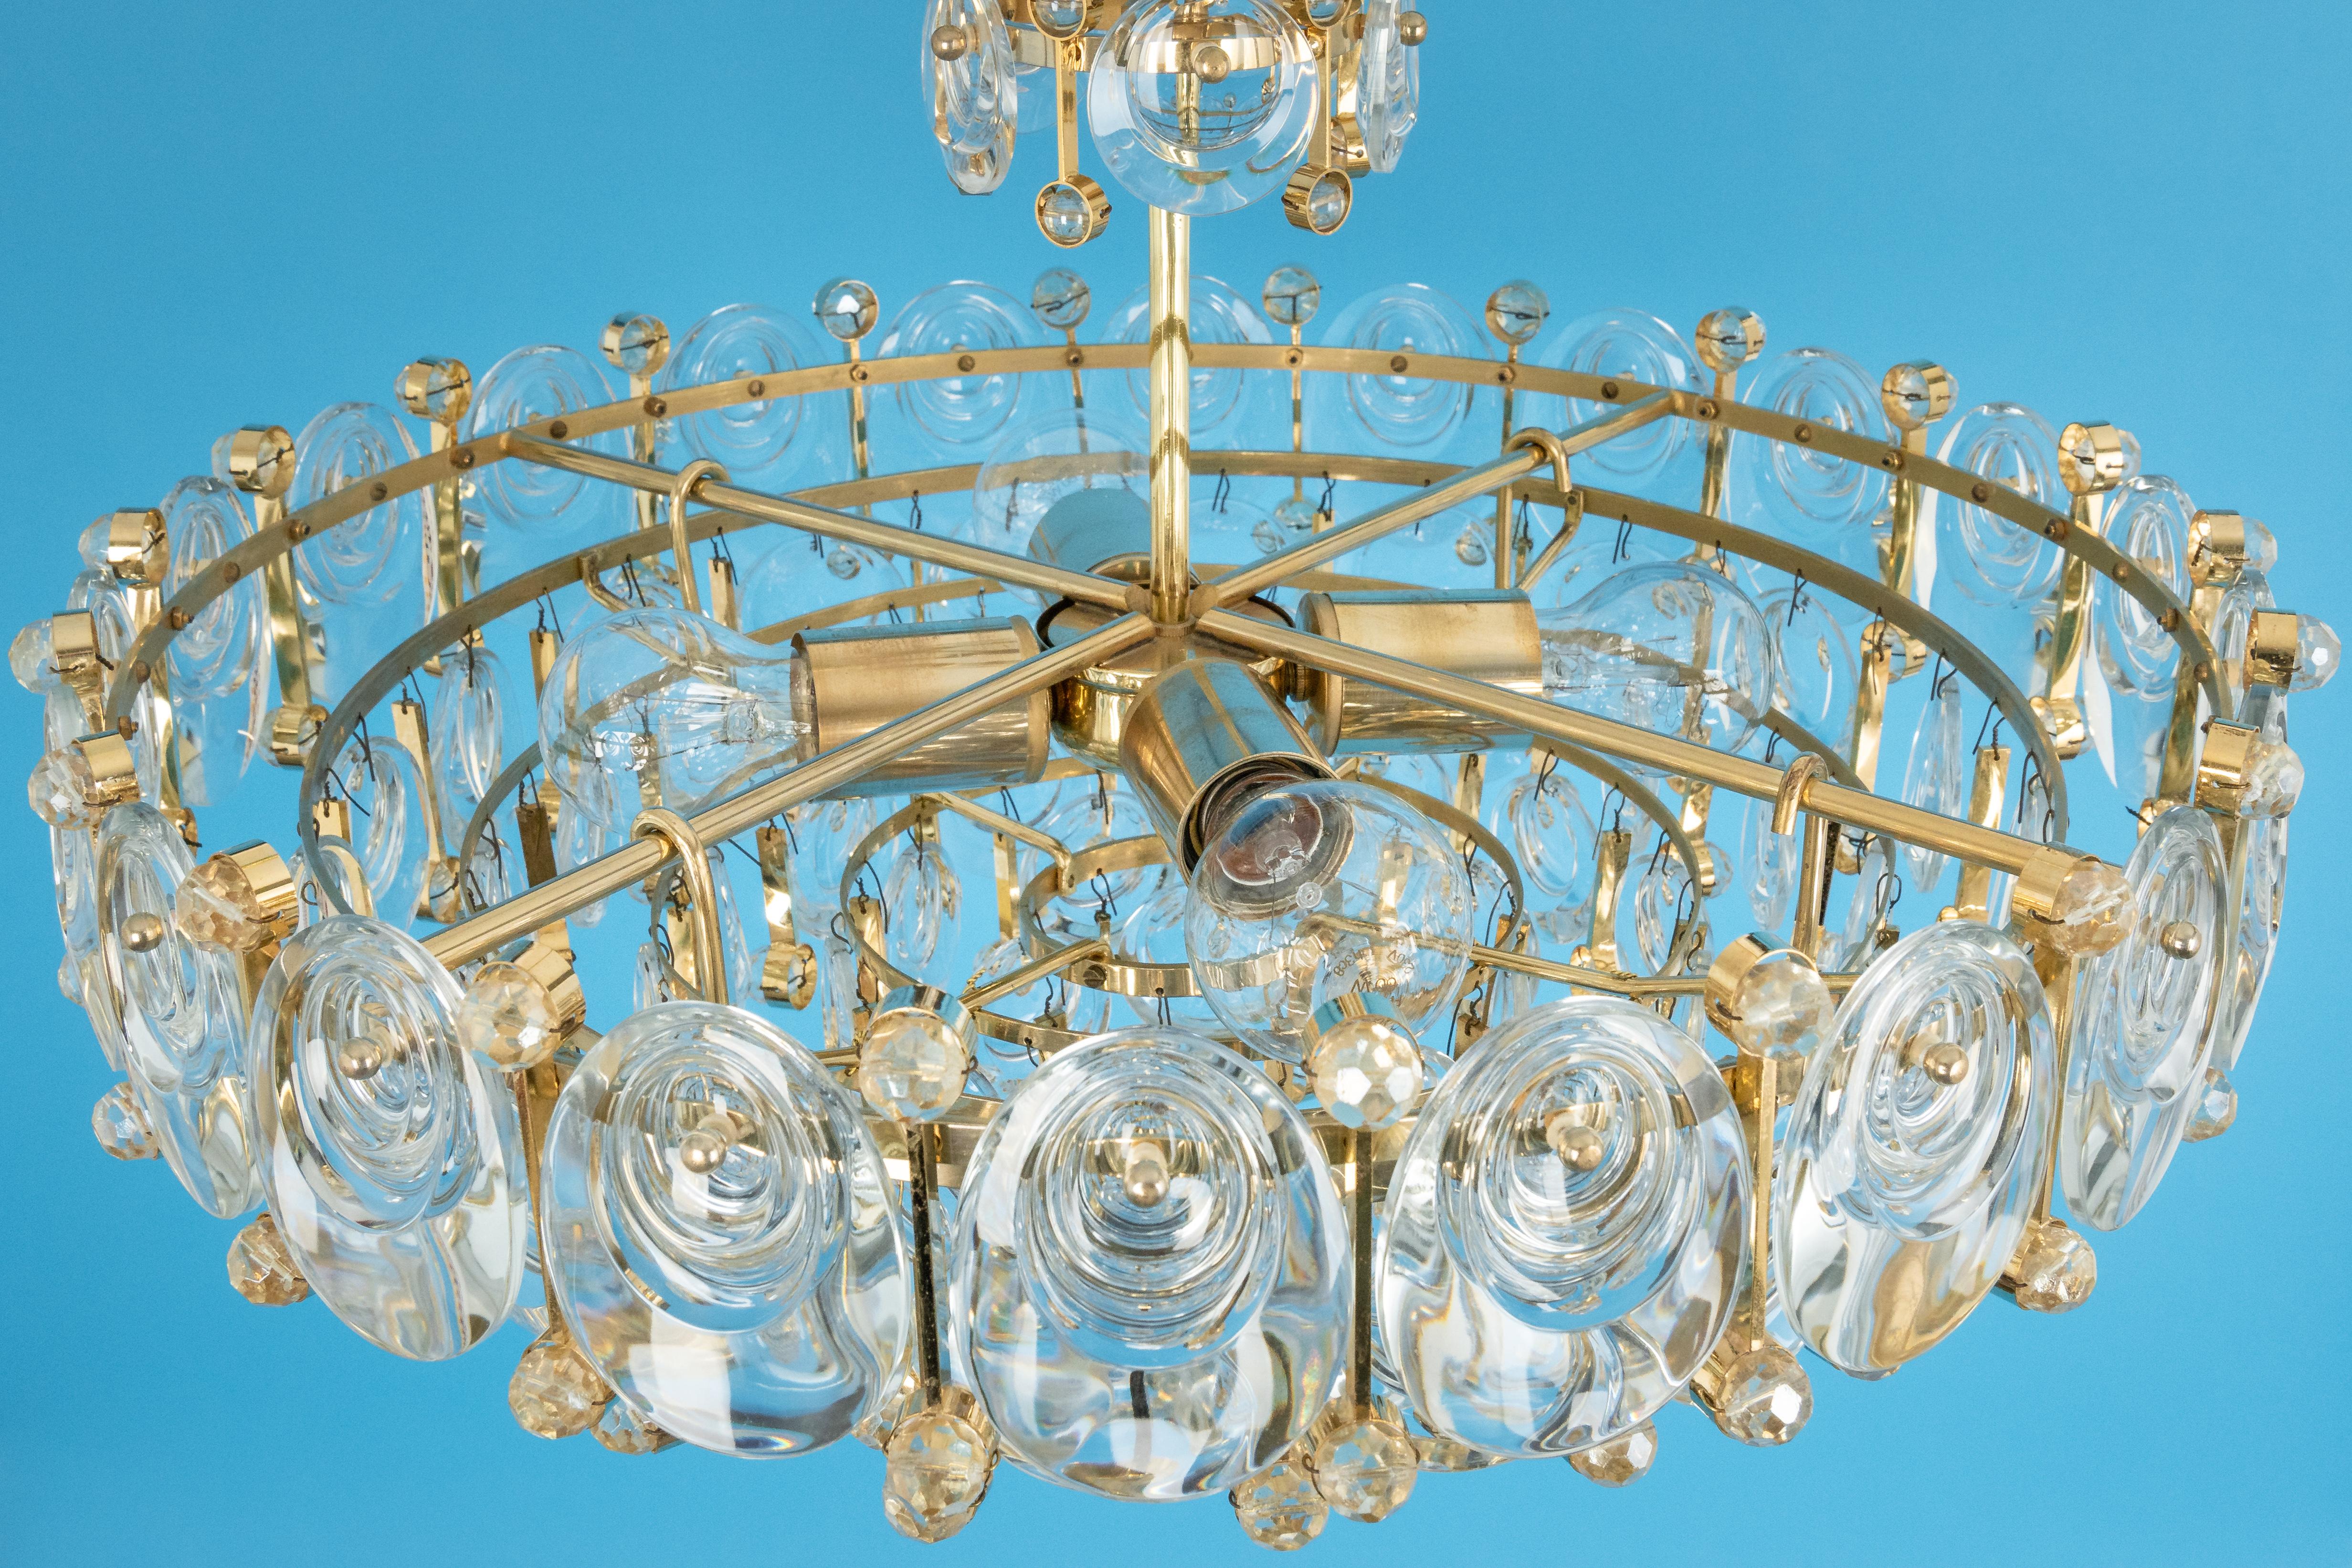 A wonderful and high-quality gilded chandelier or pendant light fixture by Palwa -Design Sciolari, Germany, 1970s.
It is made of a 24-carat gold-plated brass frame decorated with individual 